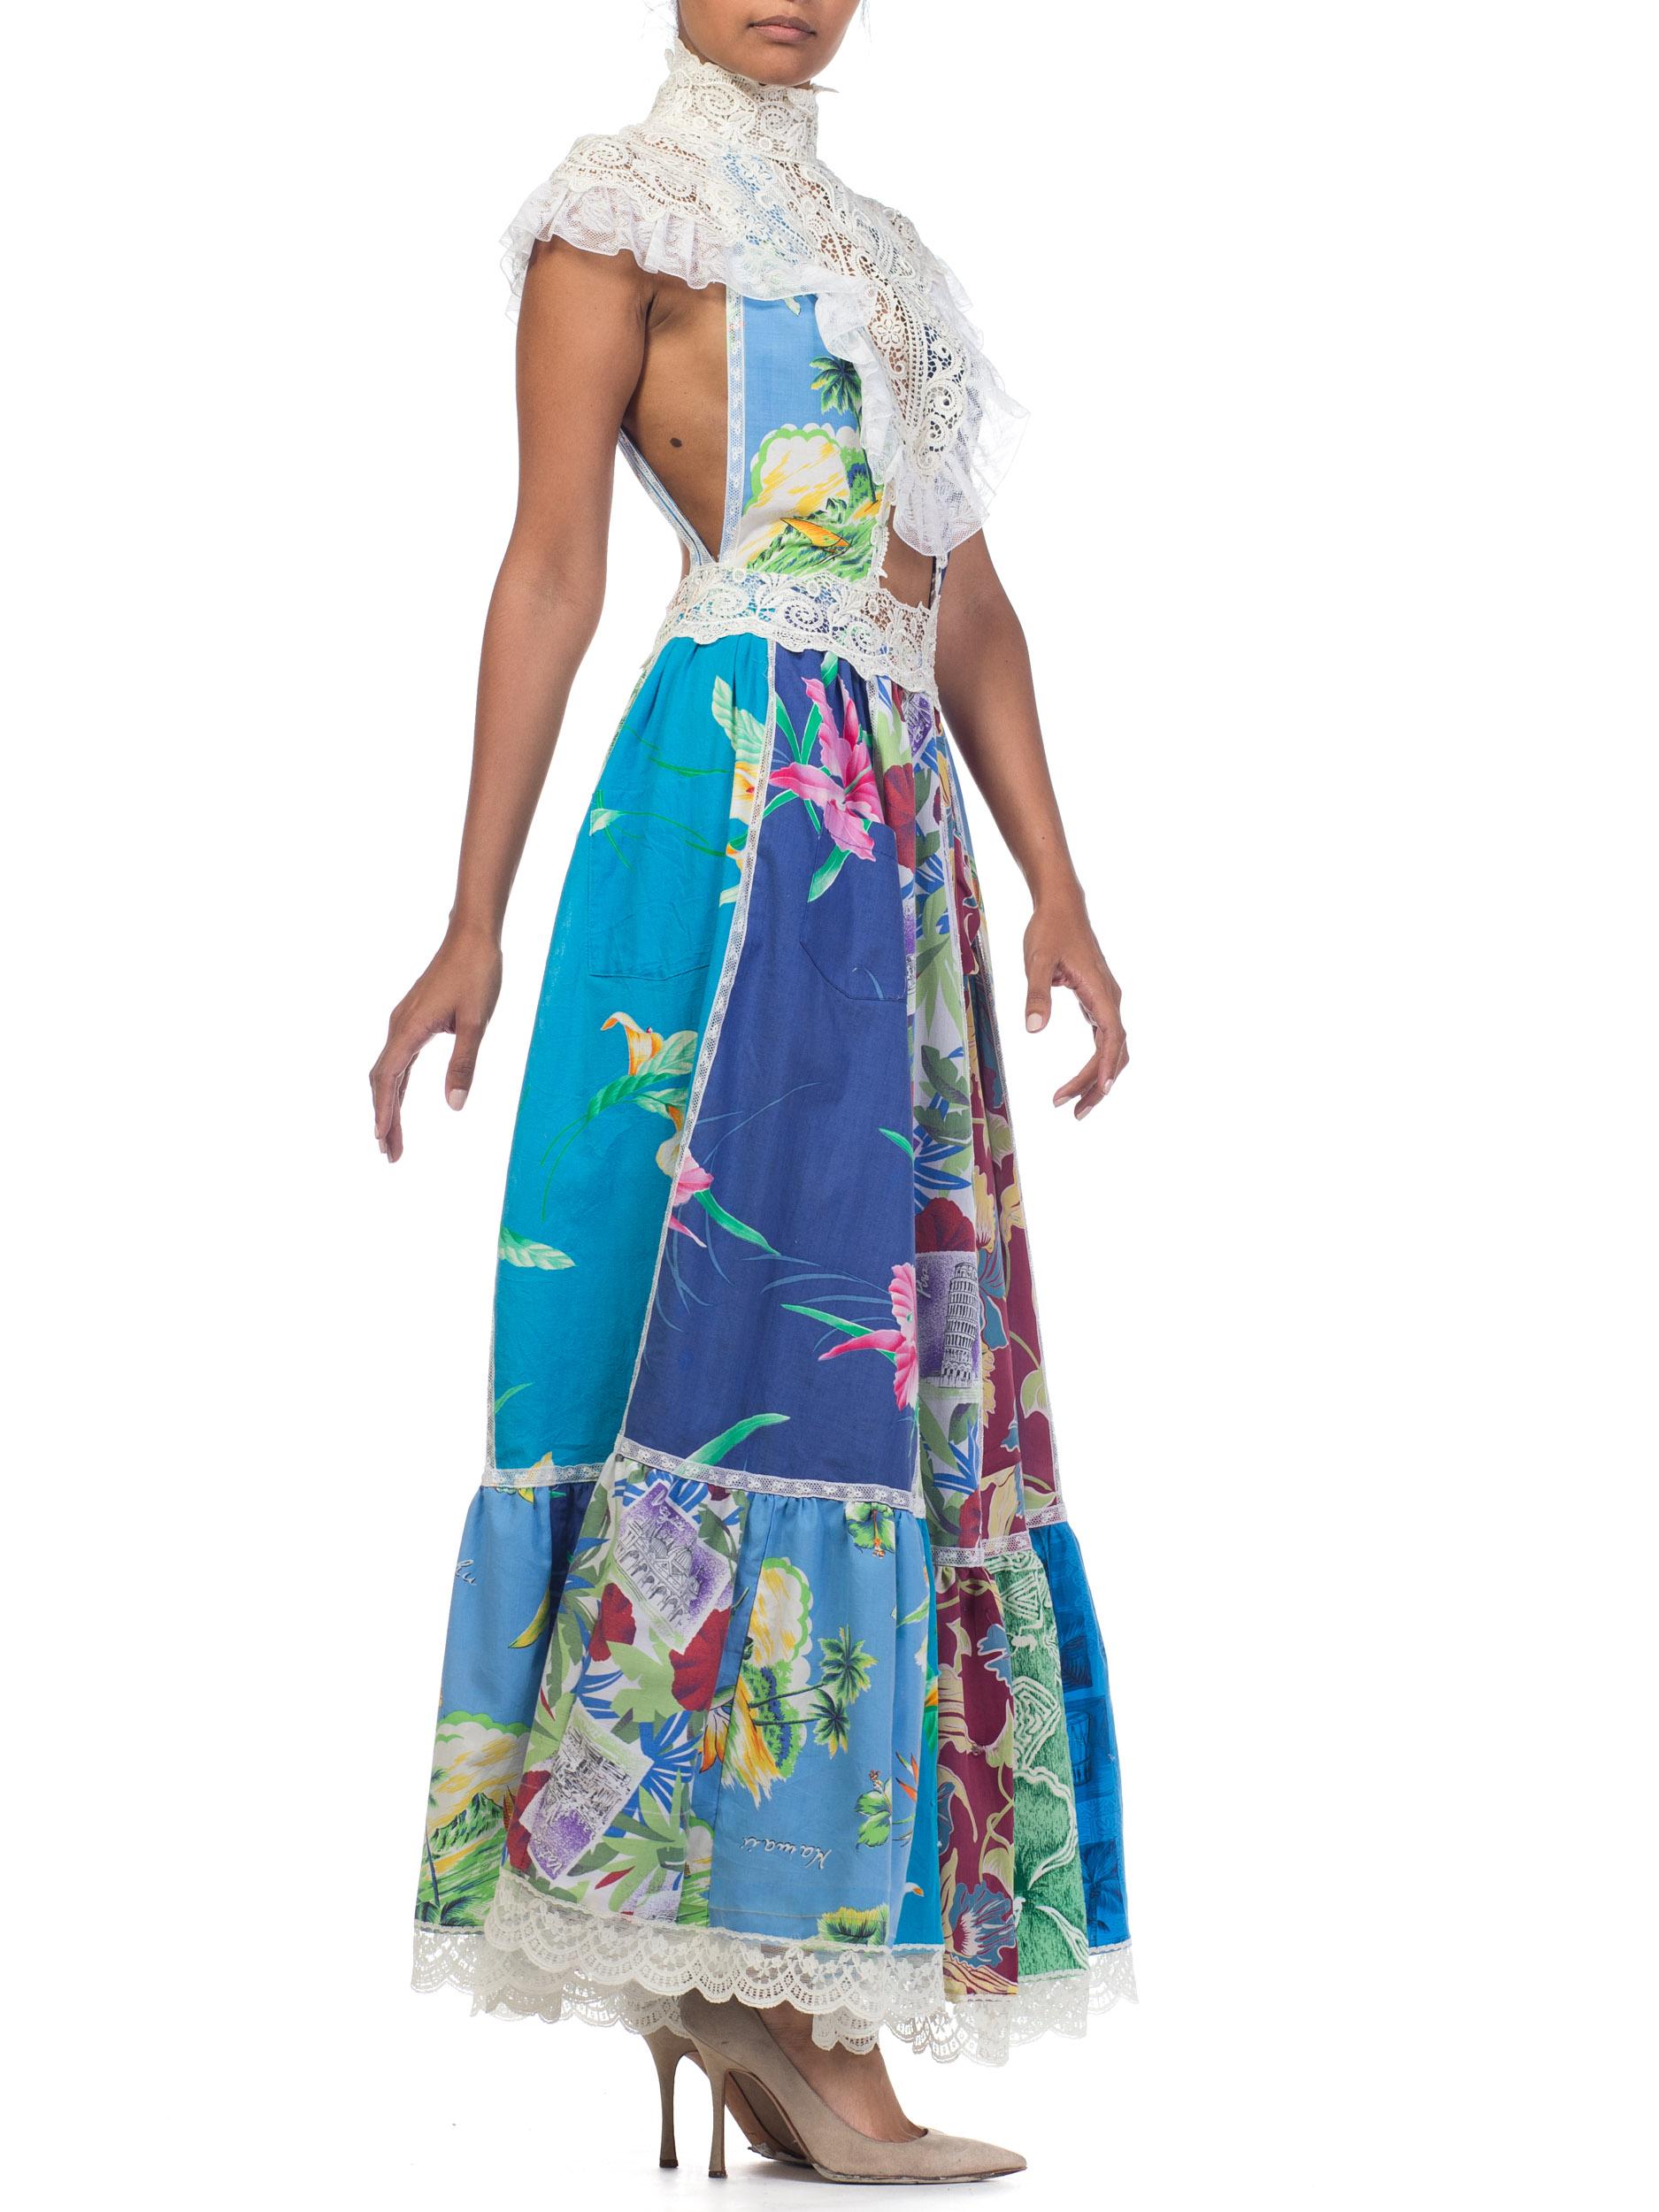 MORPHEW COLLECTION Backless Vintage Tropical Shirt Patchwork Maxi Dress With An 1